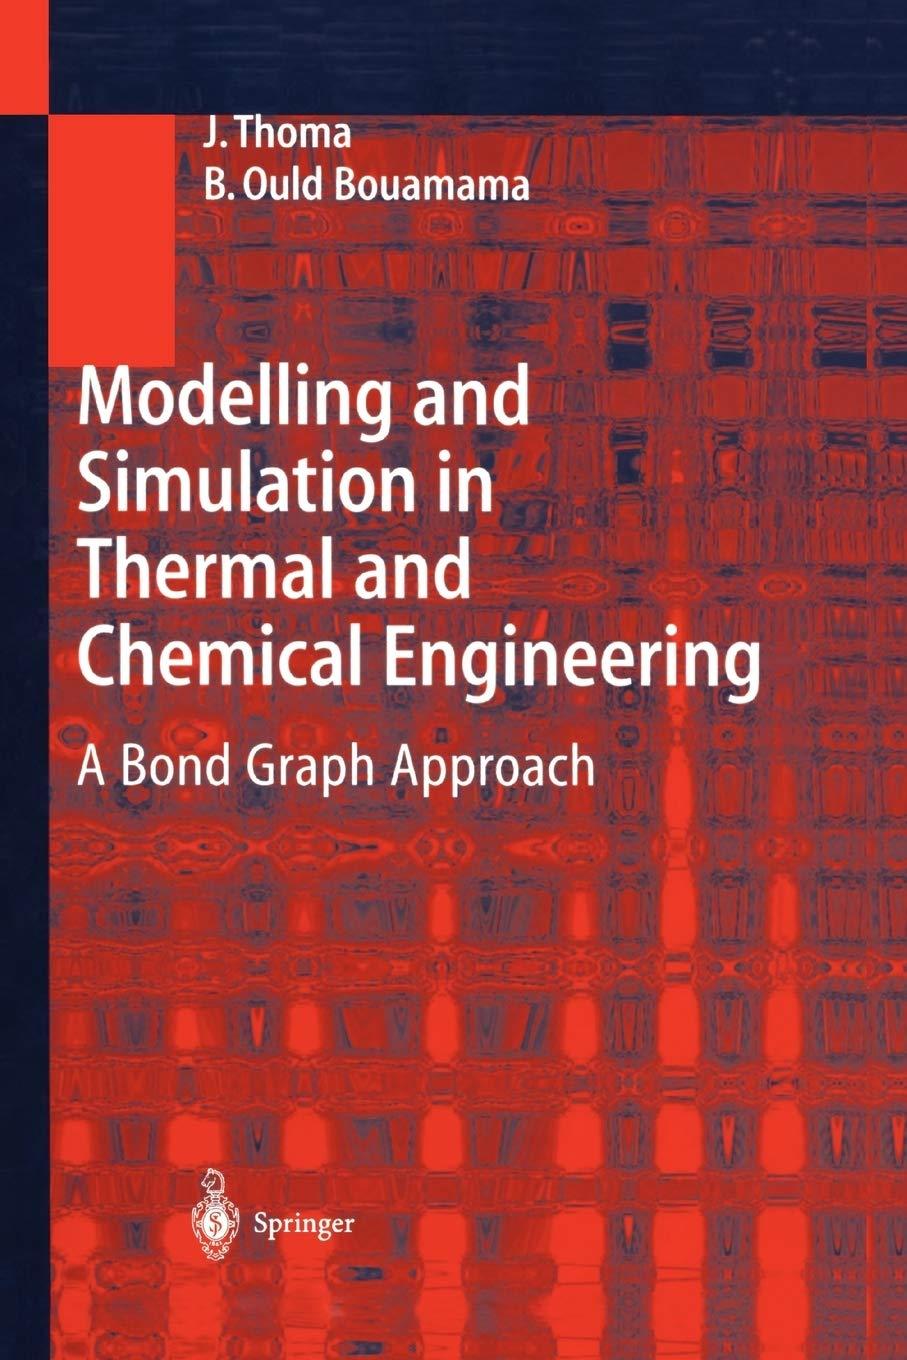 modelling and simulation in thermal and chemical engineering a bond graph approach 1st edition j. thoma, b.